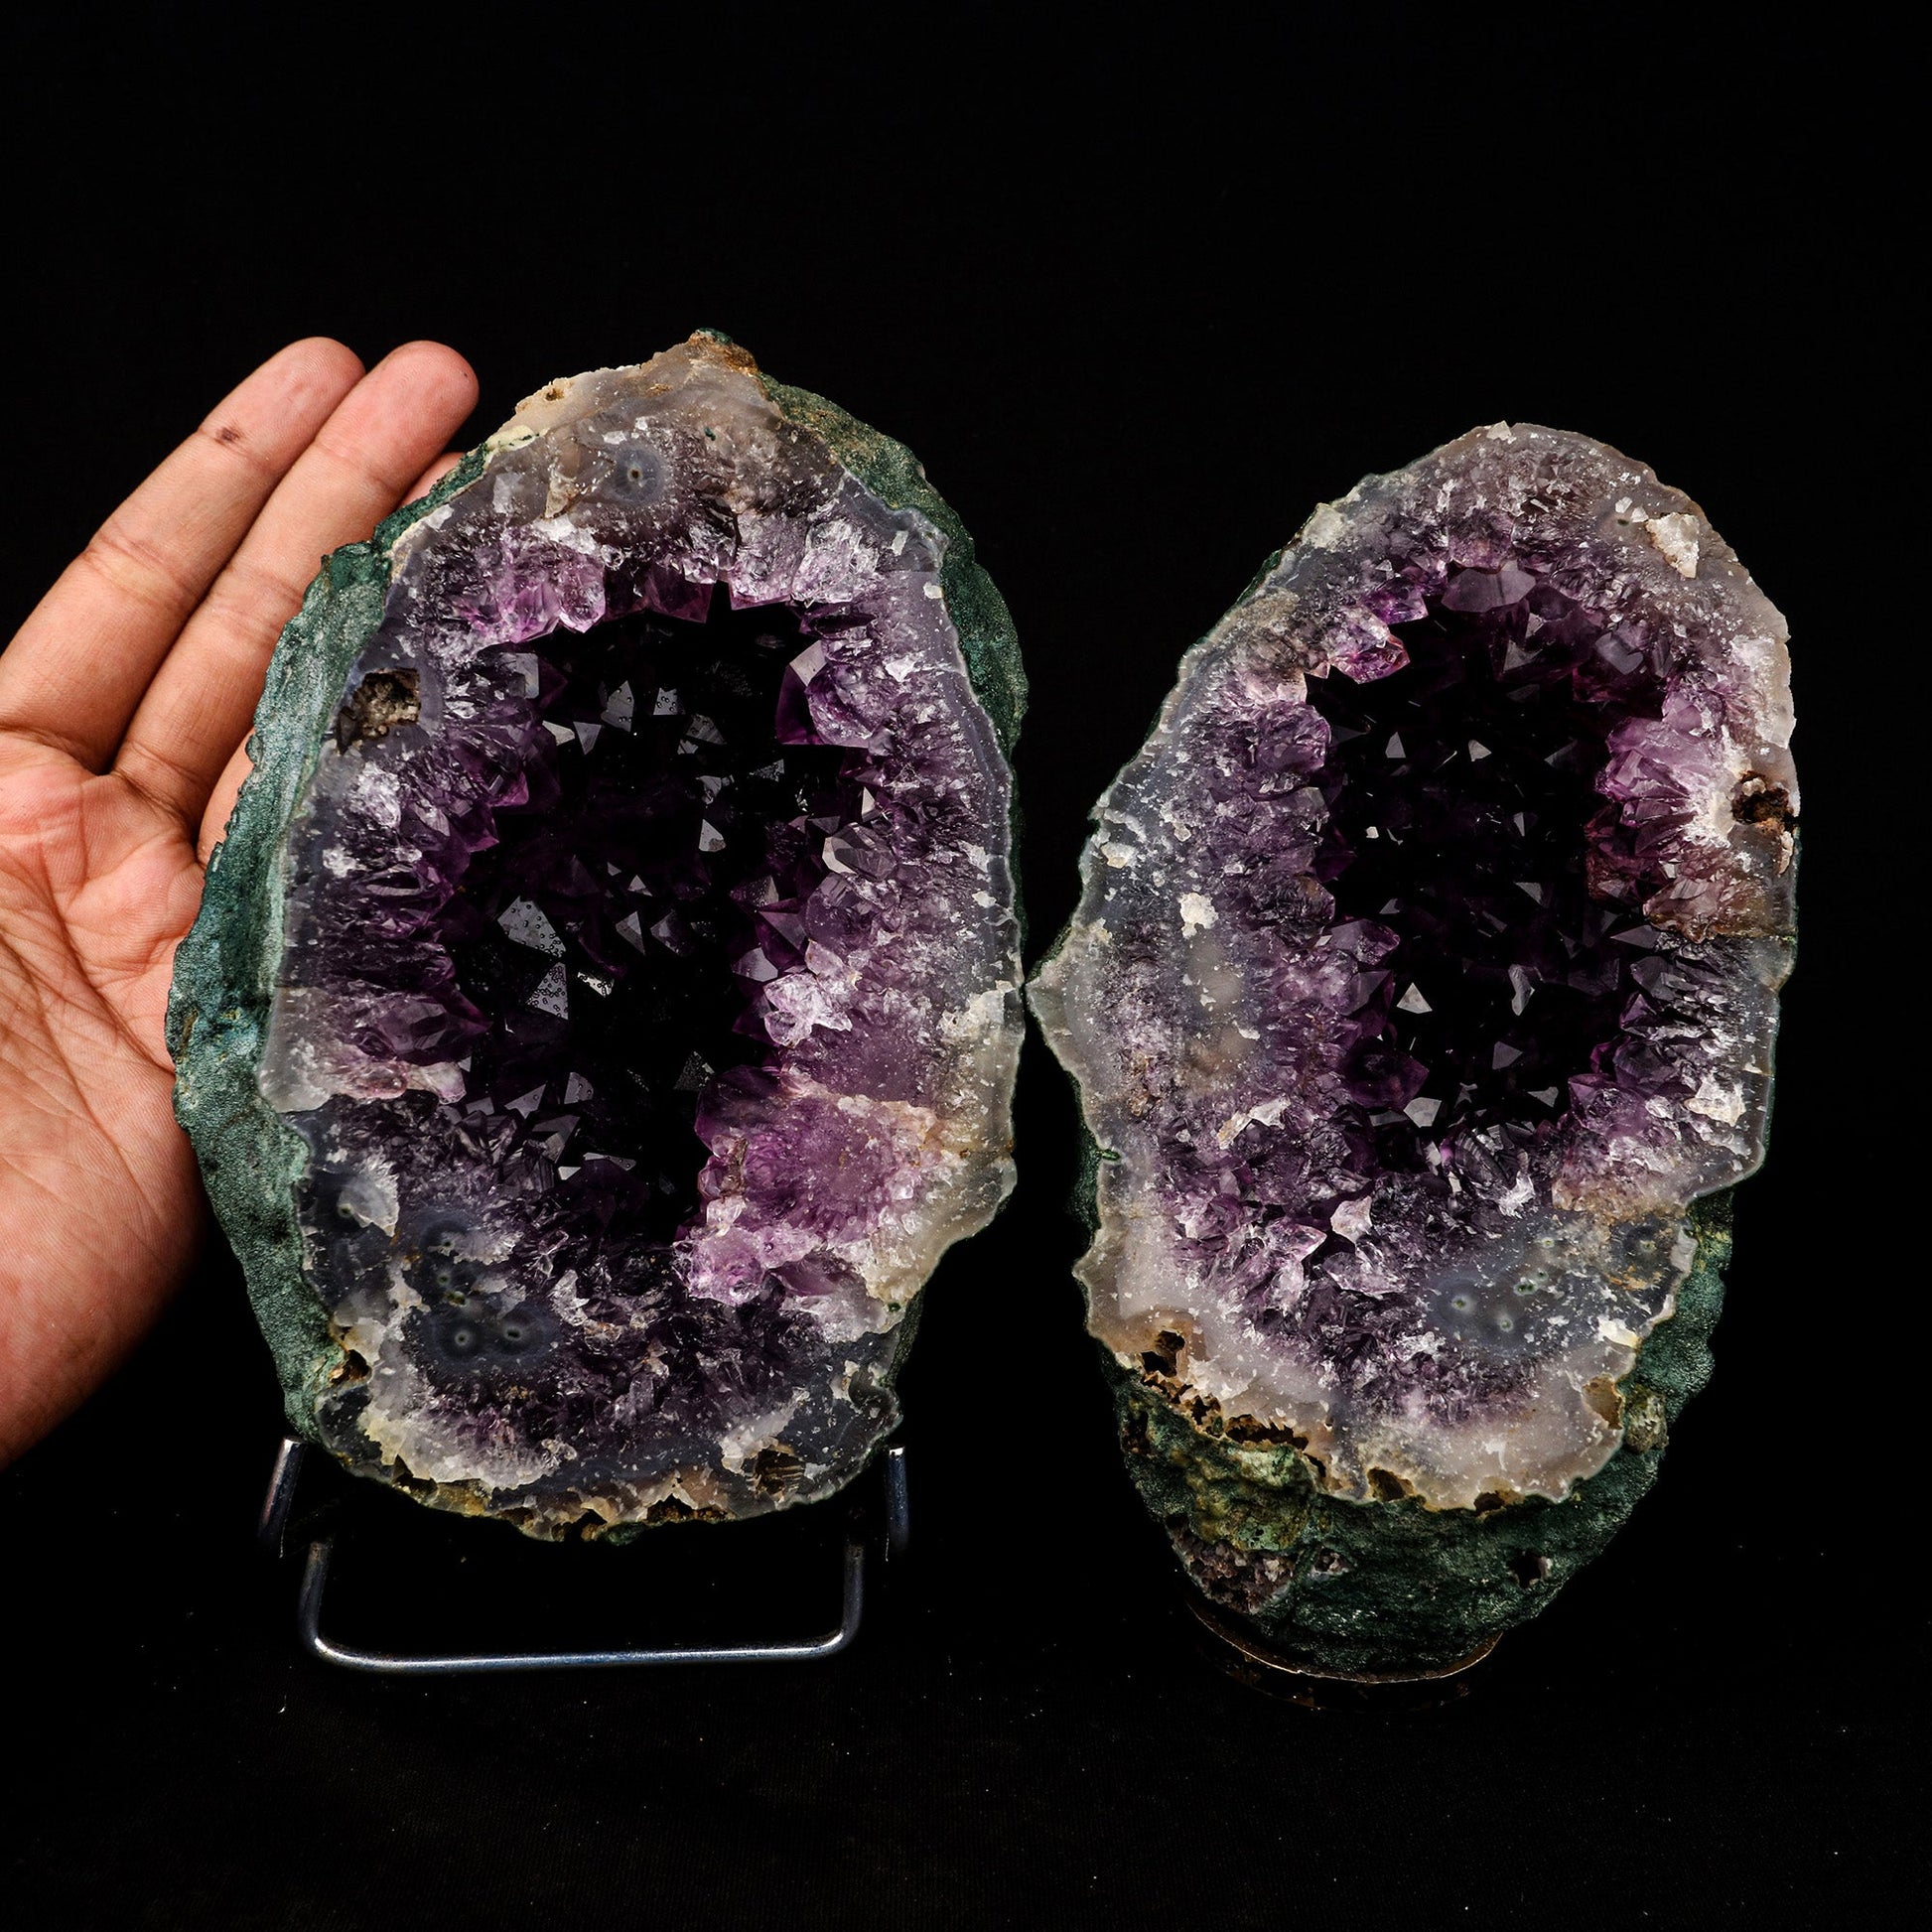 Amethyst Sprakling Two Havles Geode Natural Mineral Specimen # B 5289  https://www.superbminerals.us/products/amethyst-sprakling-two-havles-geode-natural-mineral-specimen-b-5289  Features: This essay highlights the importance of never judging a book by its cover. When you look at these two halves together, it's plain and unappealing. Even unappealing. It's a breathtaking contrast to see the sparkling, purple Amethyst crystals lining the entire chamber on both half as it splits apart!